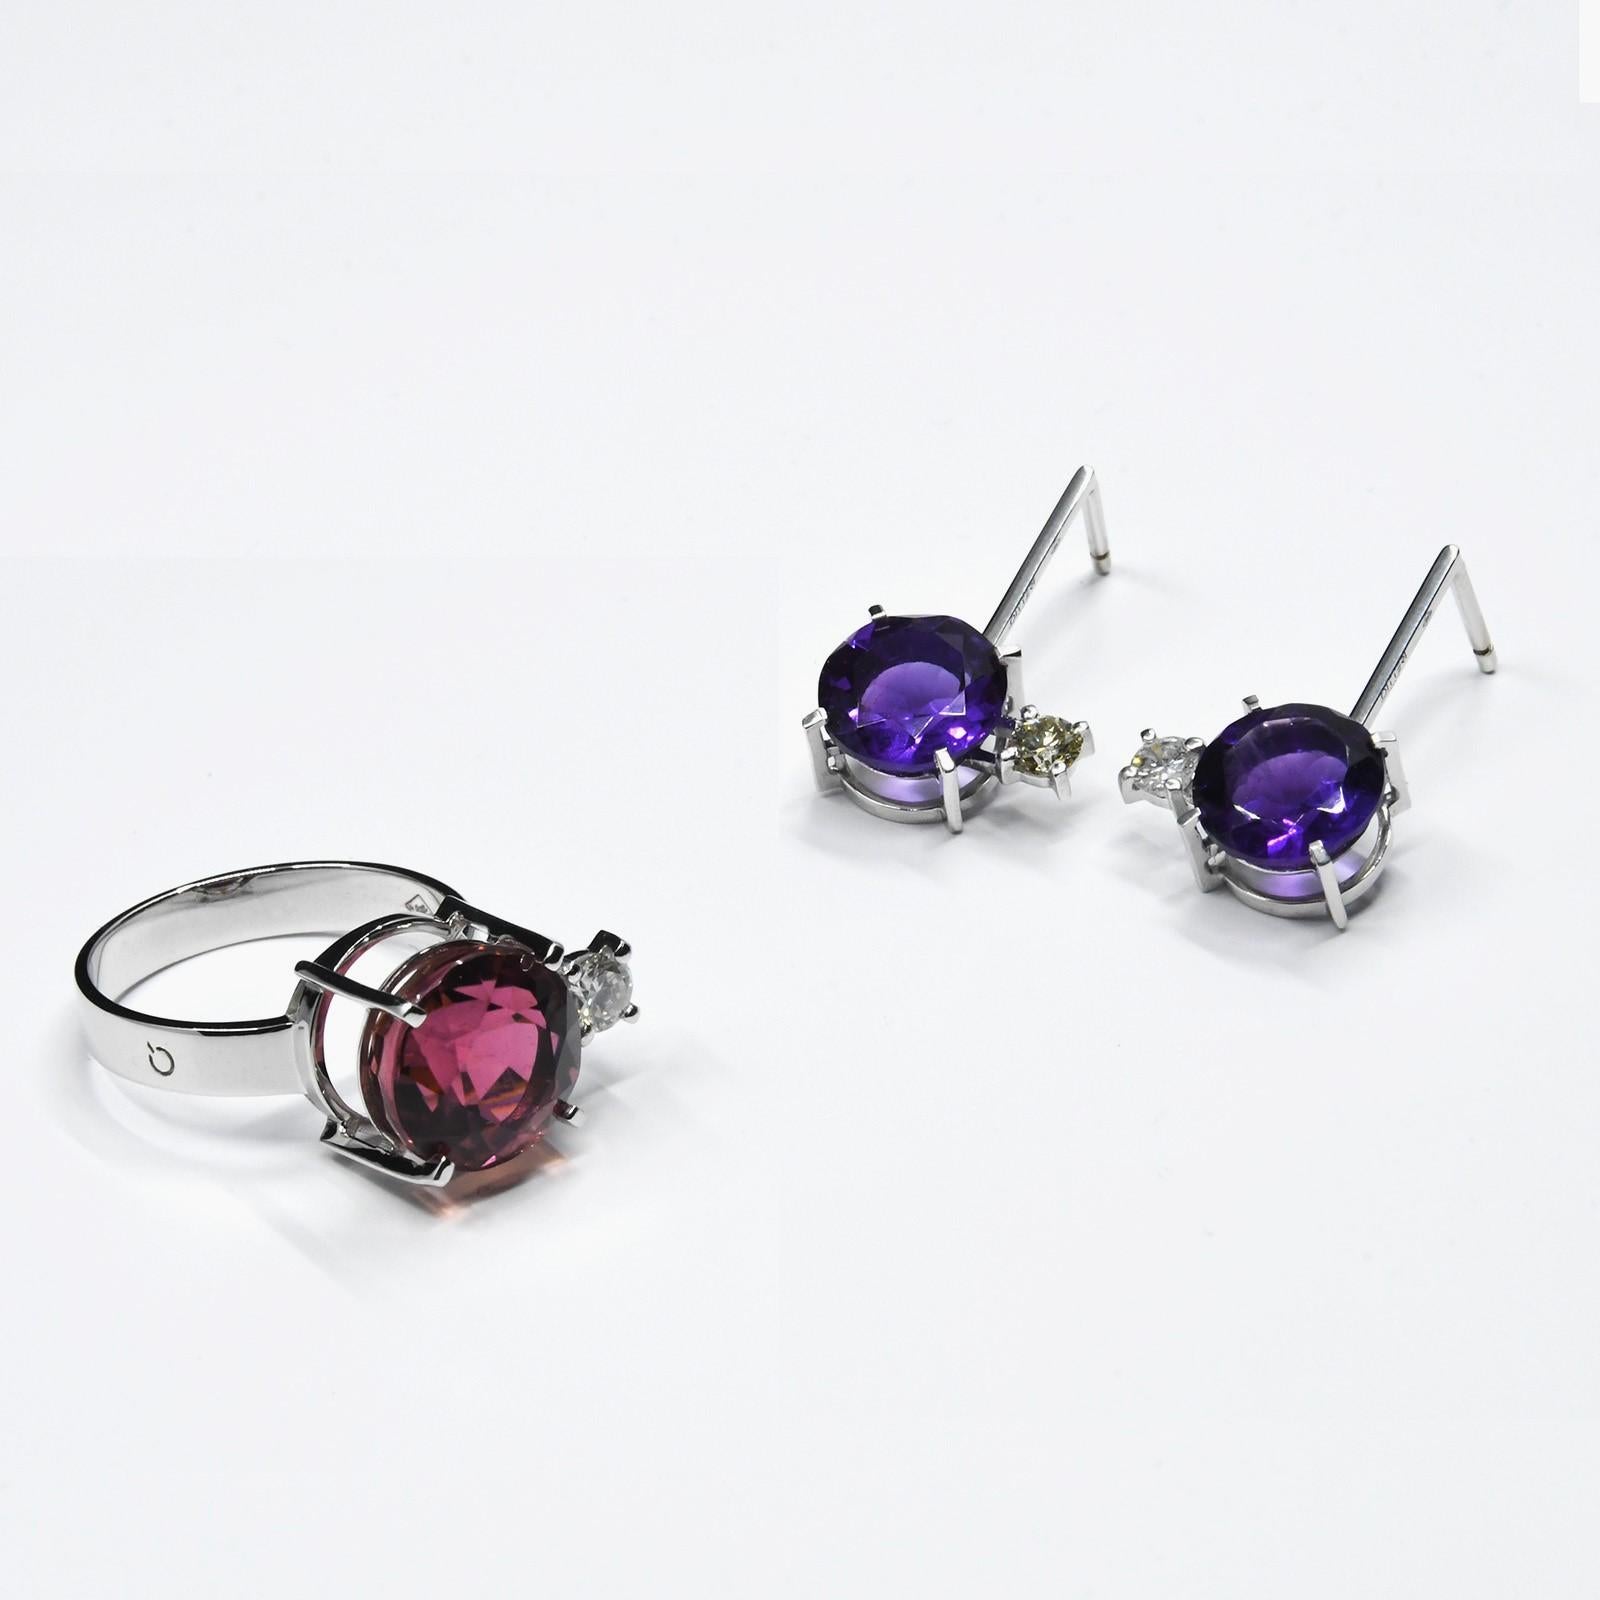 Brilliant Cut Singularity Earings with 2.5 ct Amethysts, 0.1 ct Diamonds on 18k White Gold For Sale